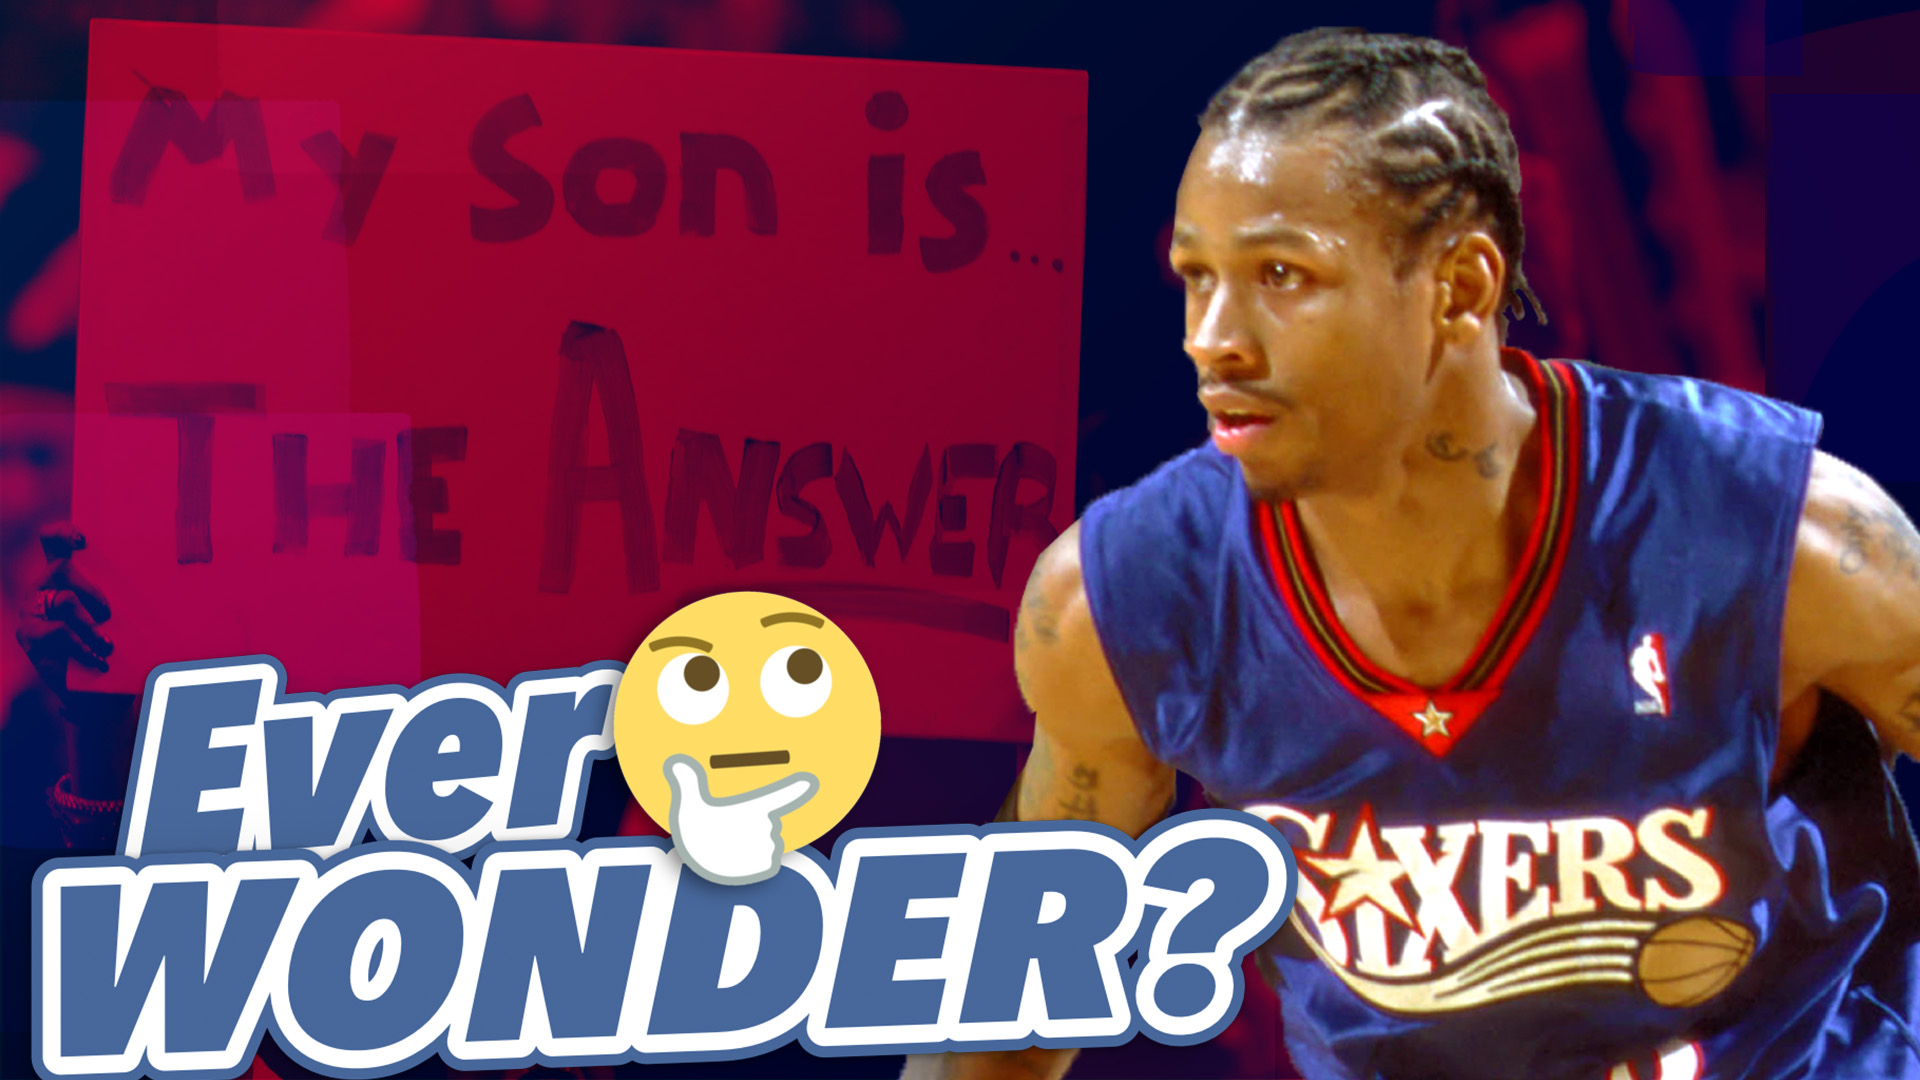 Ever wonder why Allen Iverson is called The Answer?